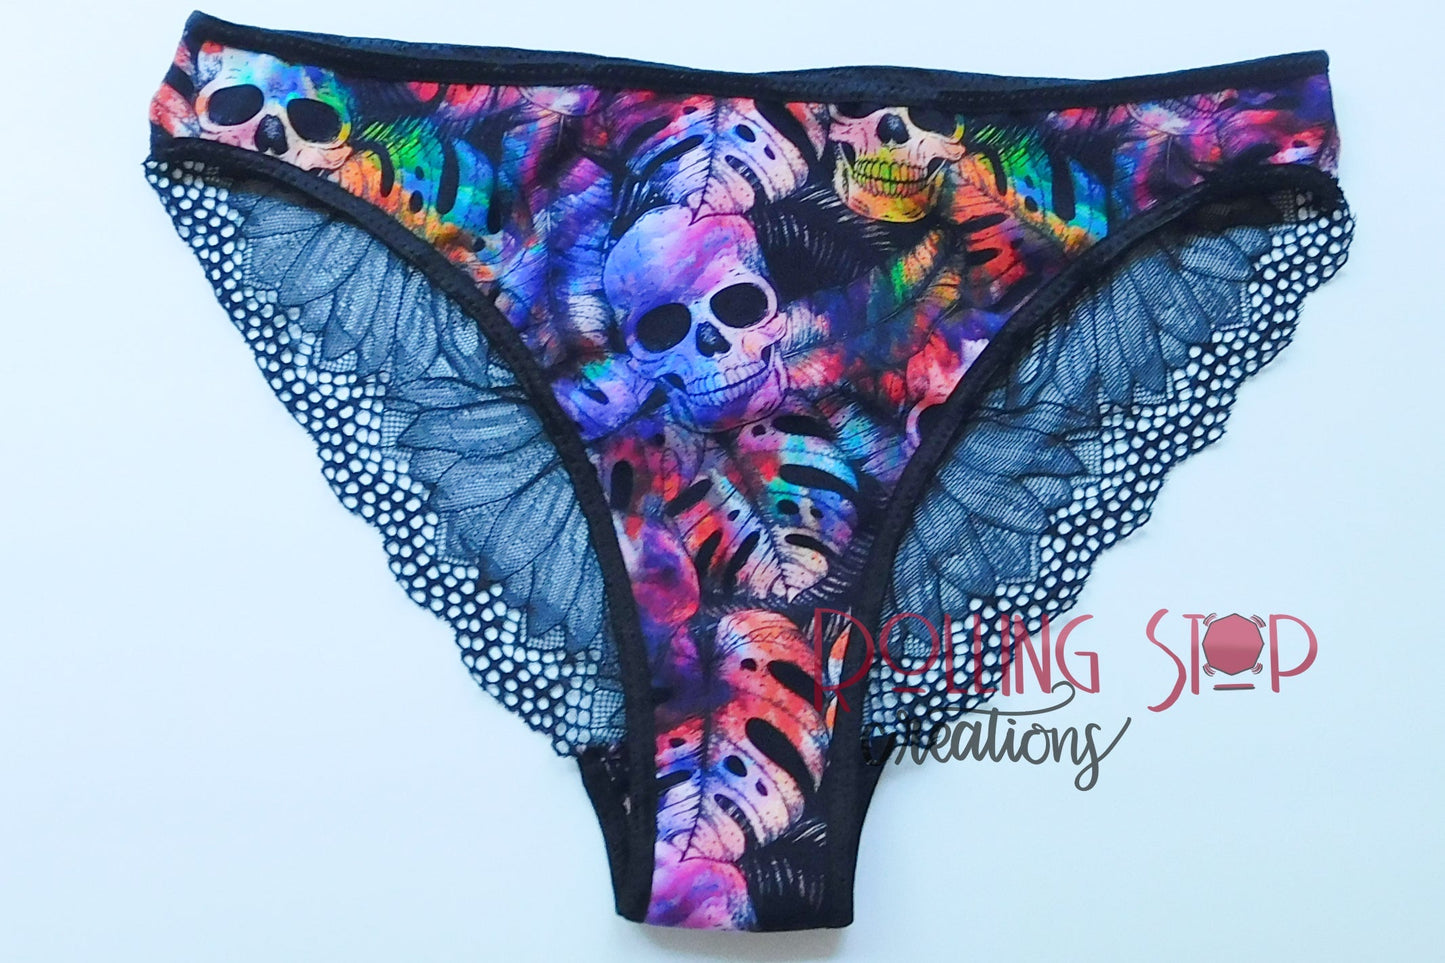 Bloody Mary Skulls & Moths Lace Accent Pantydrawls by Rolling Stop Creations sold by Rolling Stop Creations Jundies - L